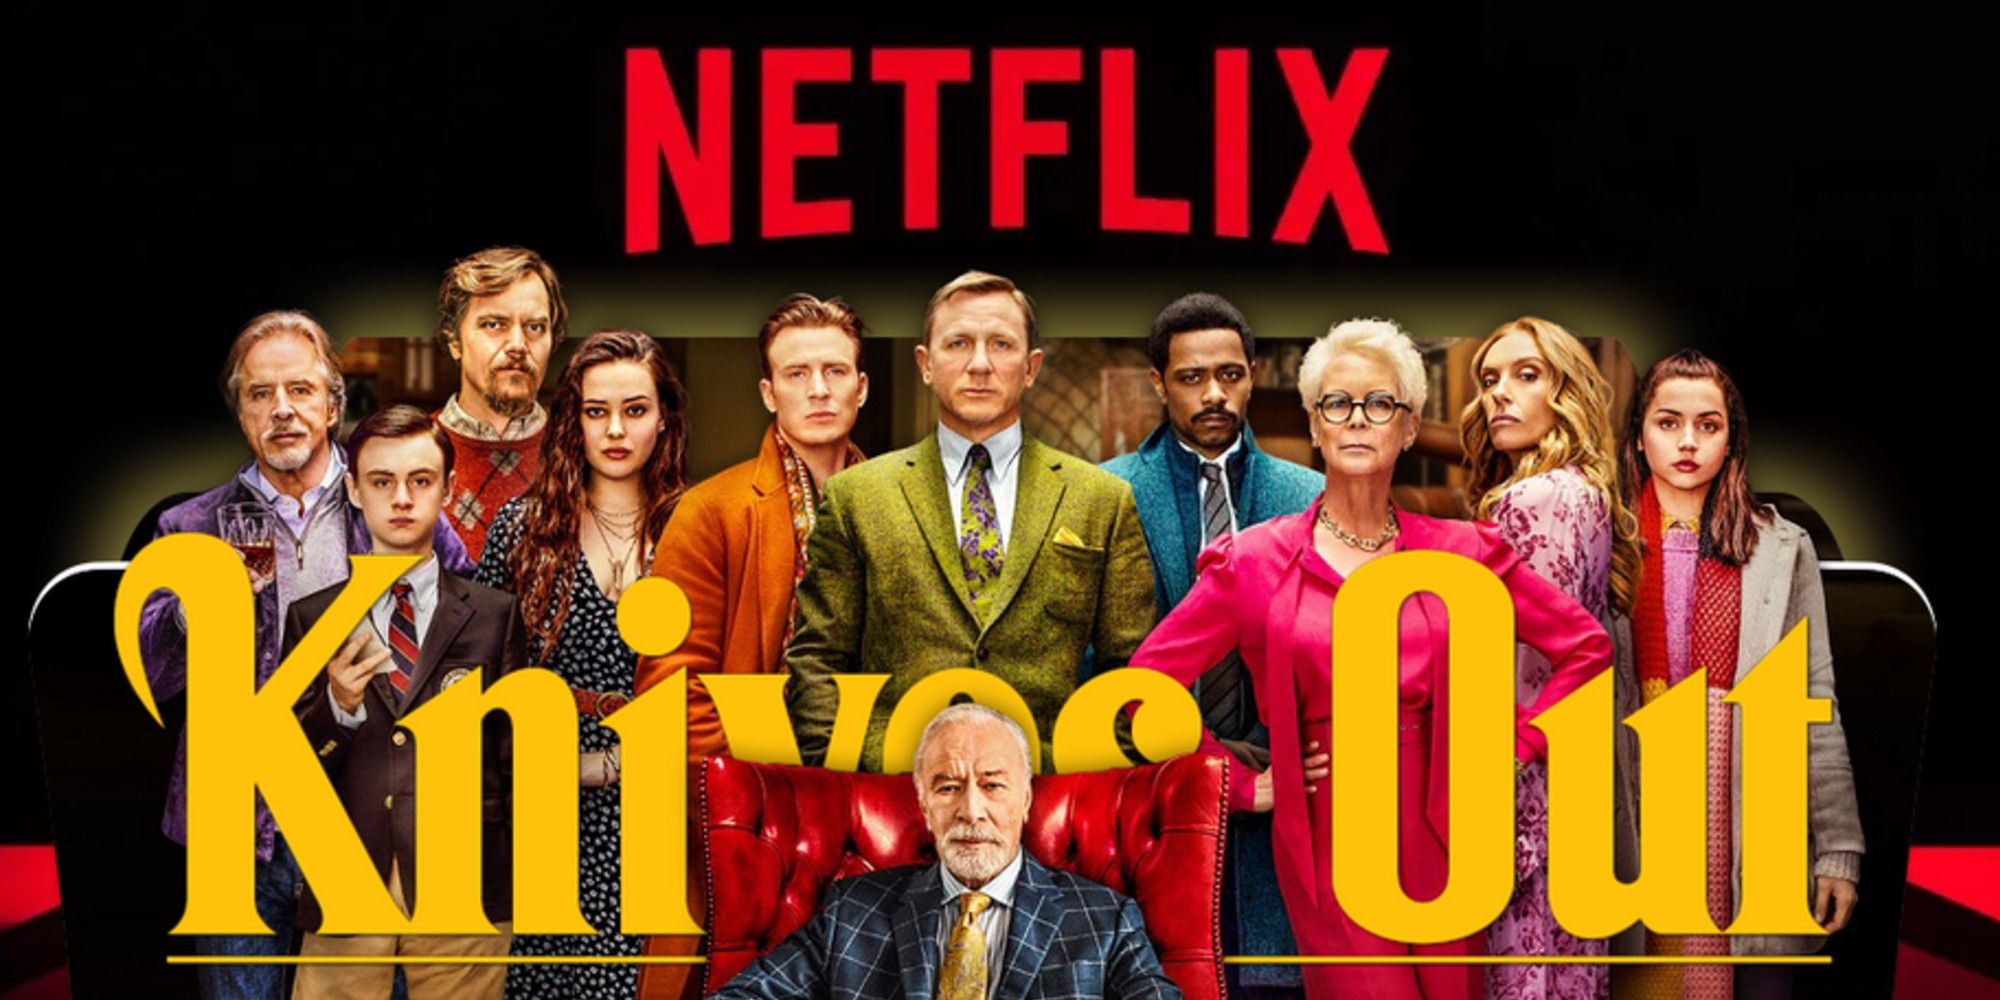 The Netflix logo sits above the Knives Out poster